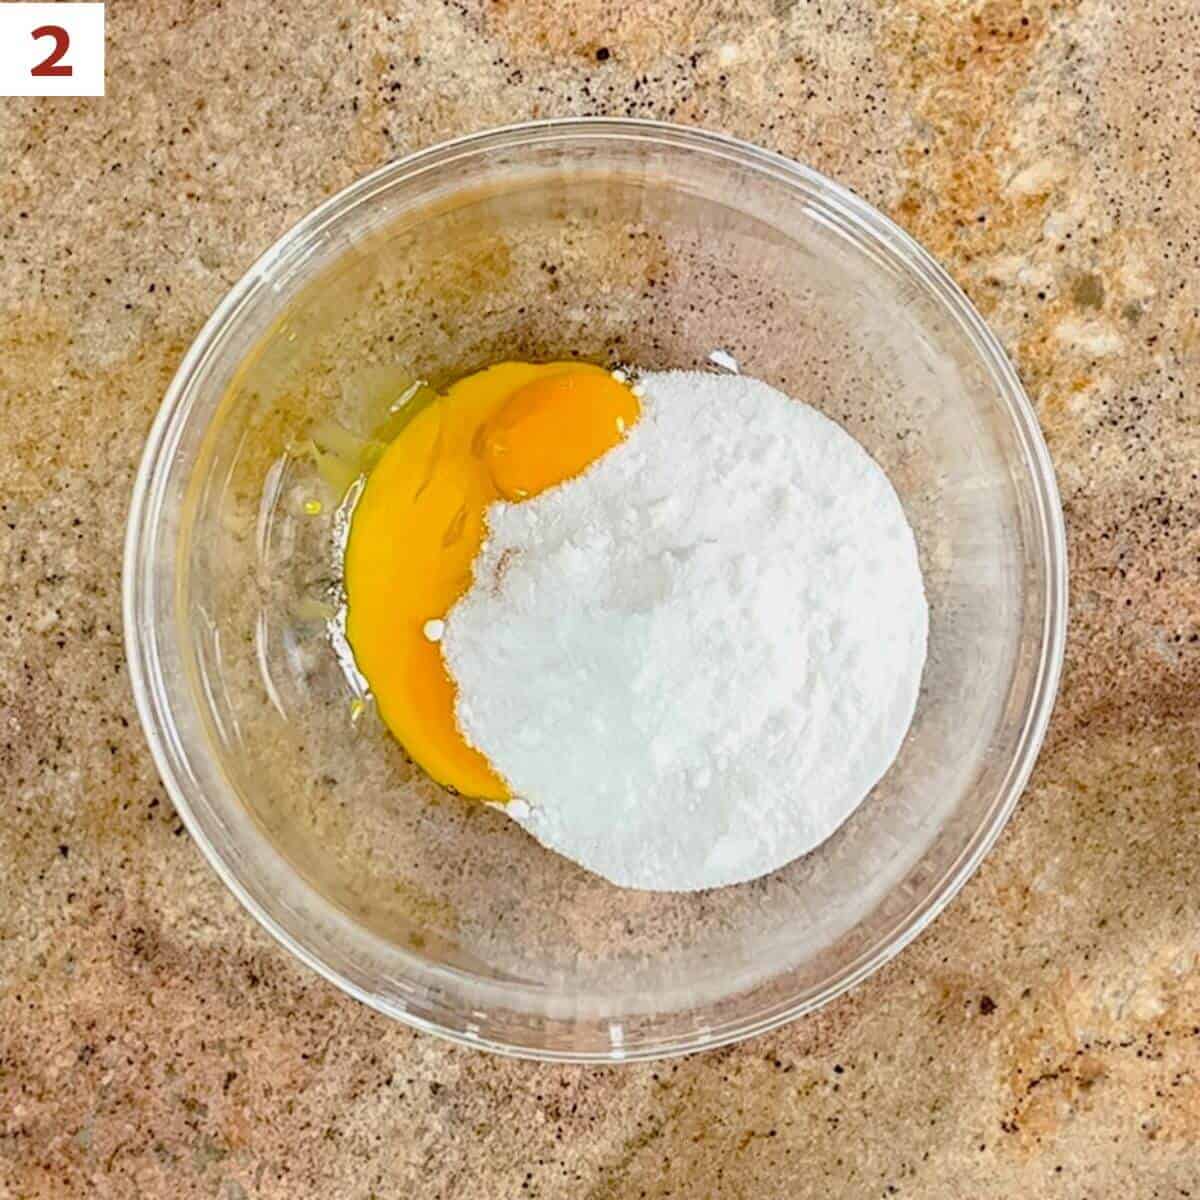 Egg yolks & sugar in a glass bowl from overhead.